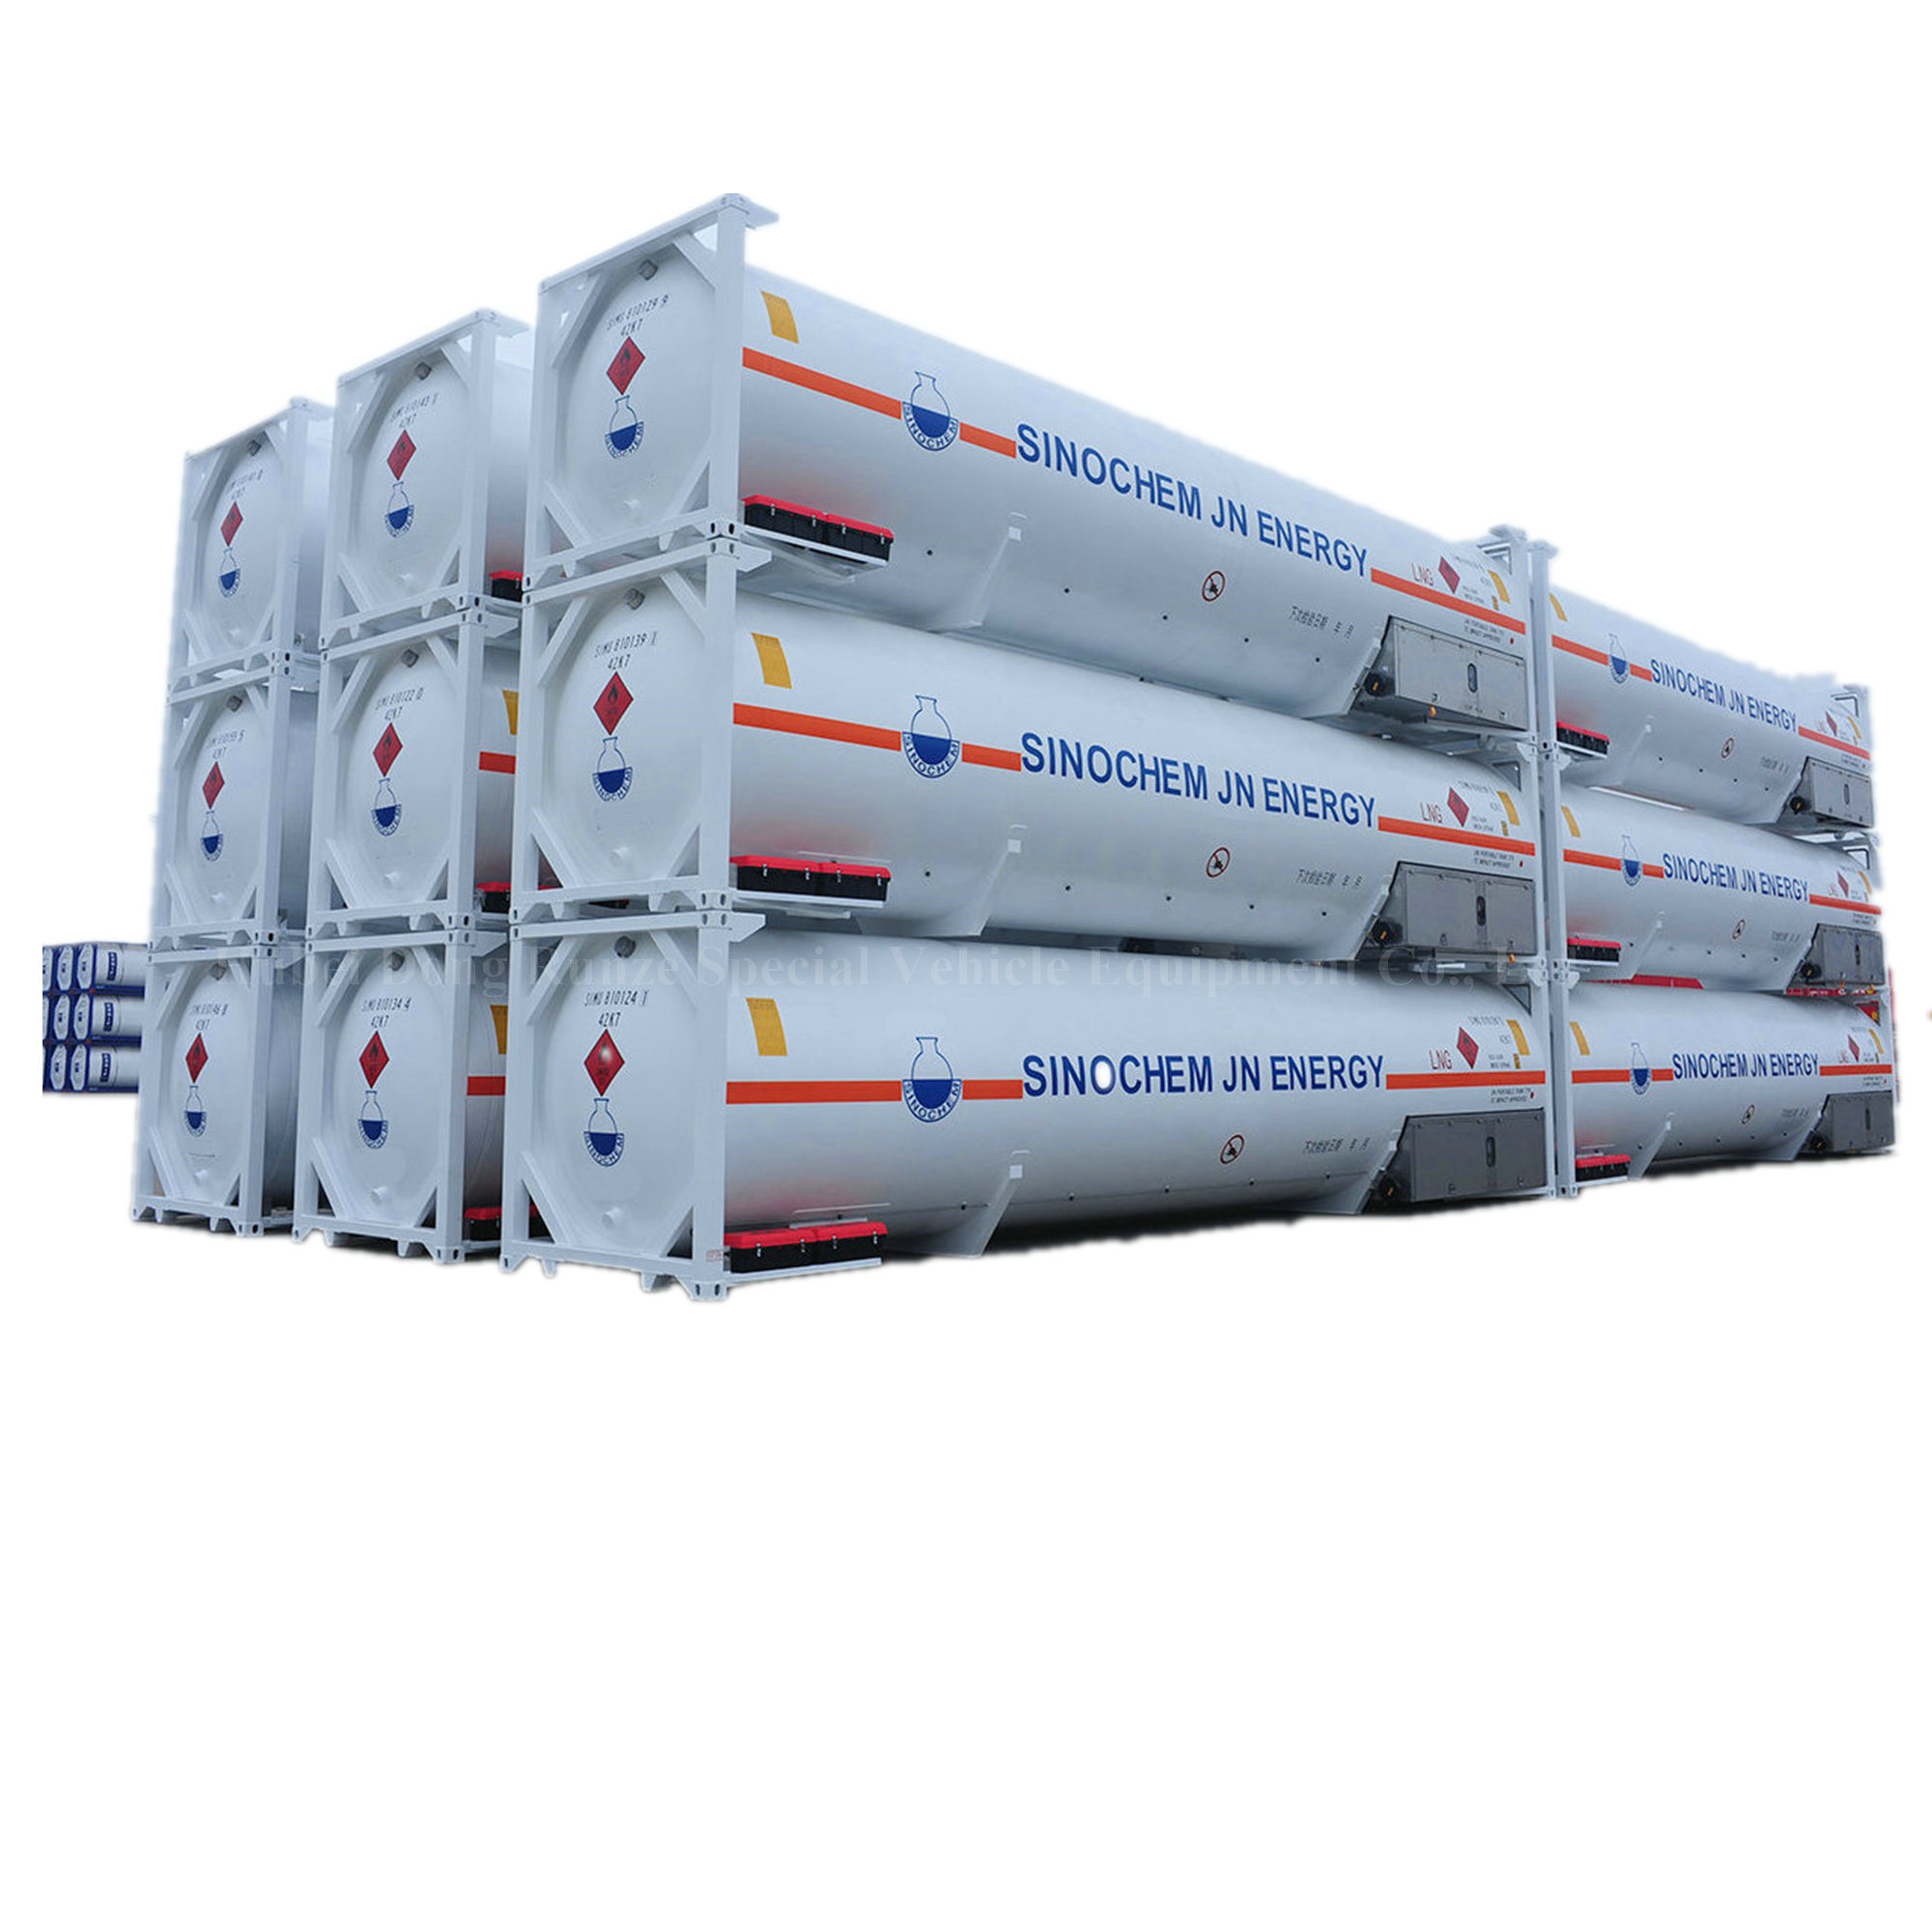 40FT T75 Cryogenic Liquid Lox/Lin/Lar/Lco2/LNG Storage Tank ISO Tank Container (Liquefied Natural Gas / Ethylene / Ethane /Nitrogen /Oxygen /Methane)